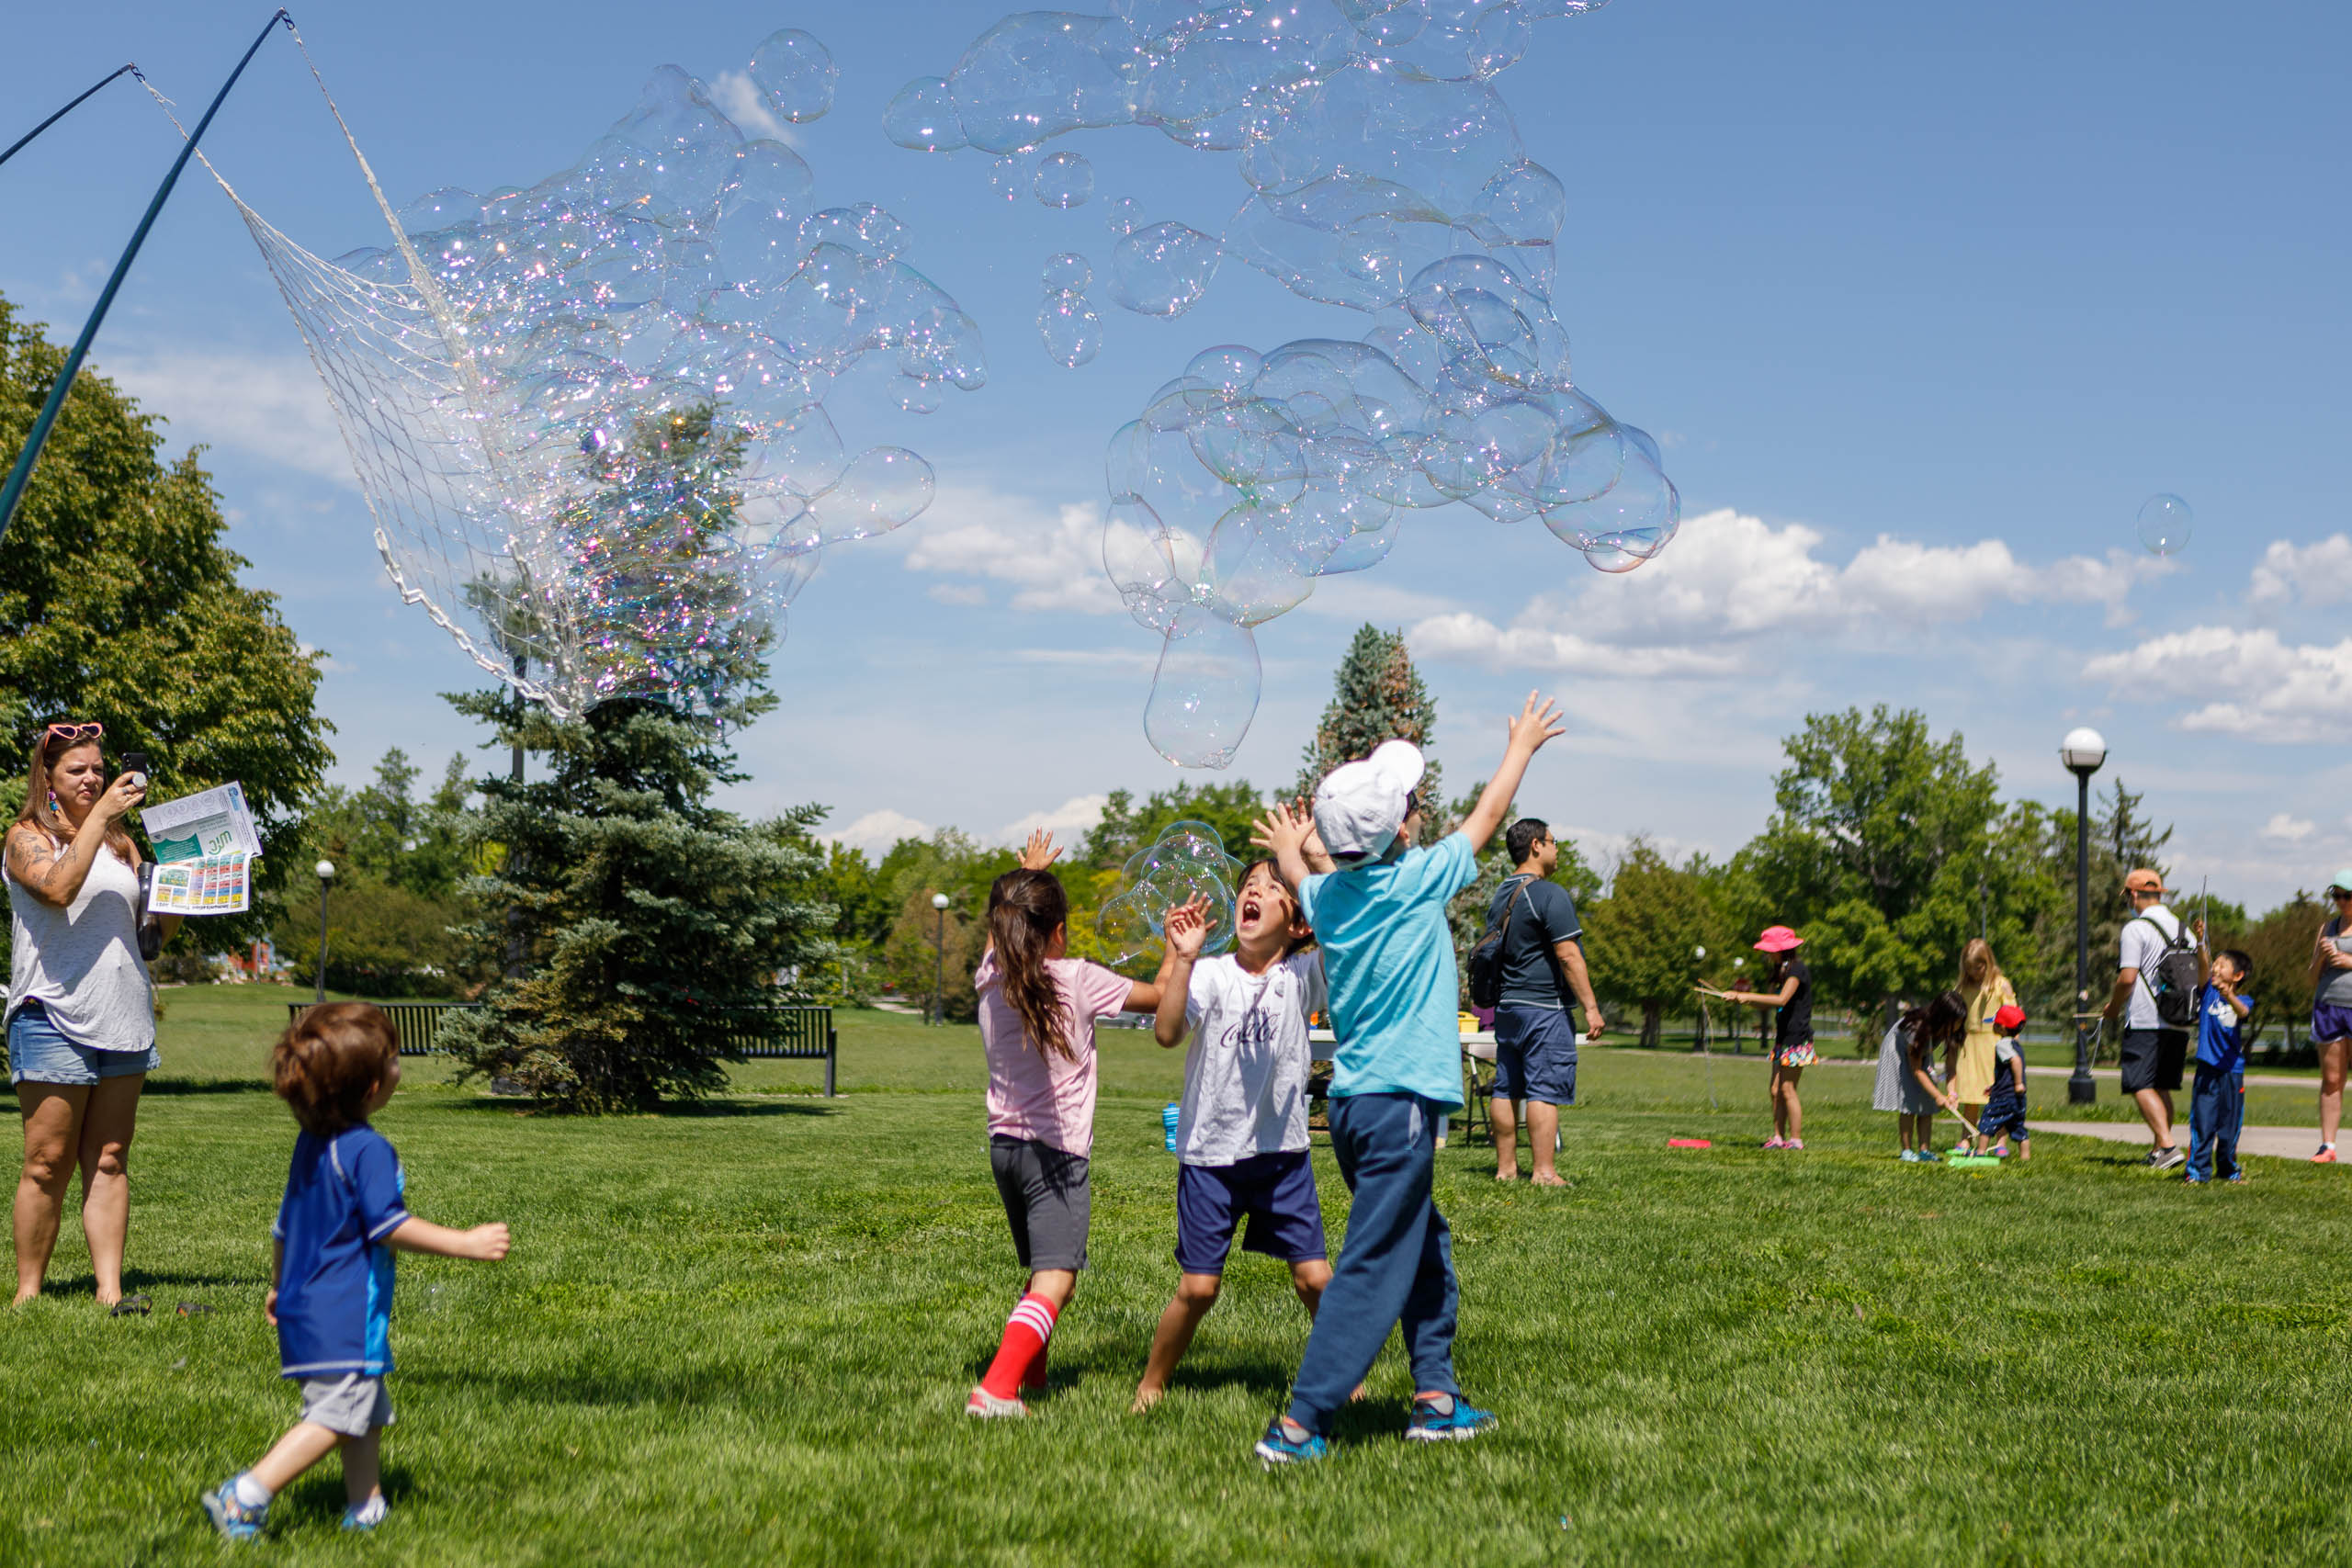 Kids play with giant bubbles outside